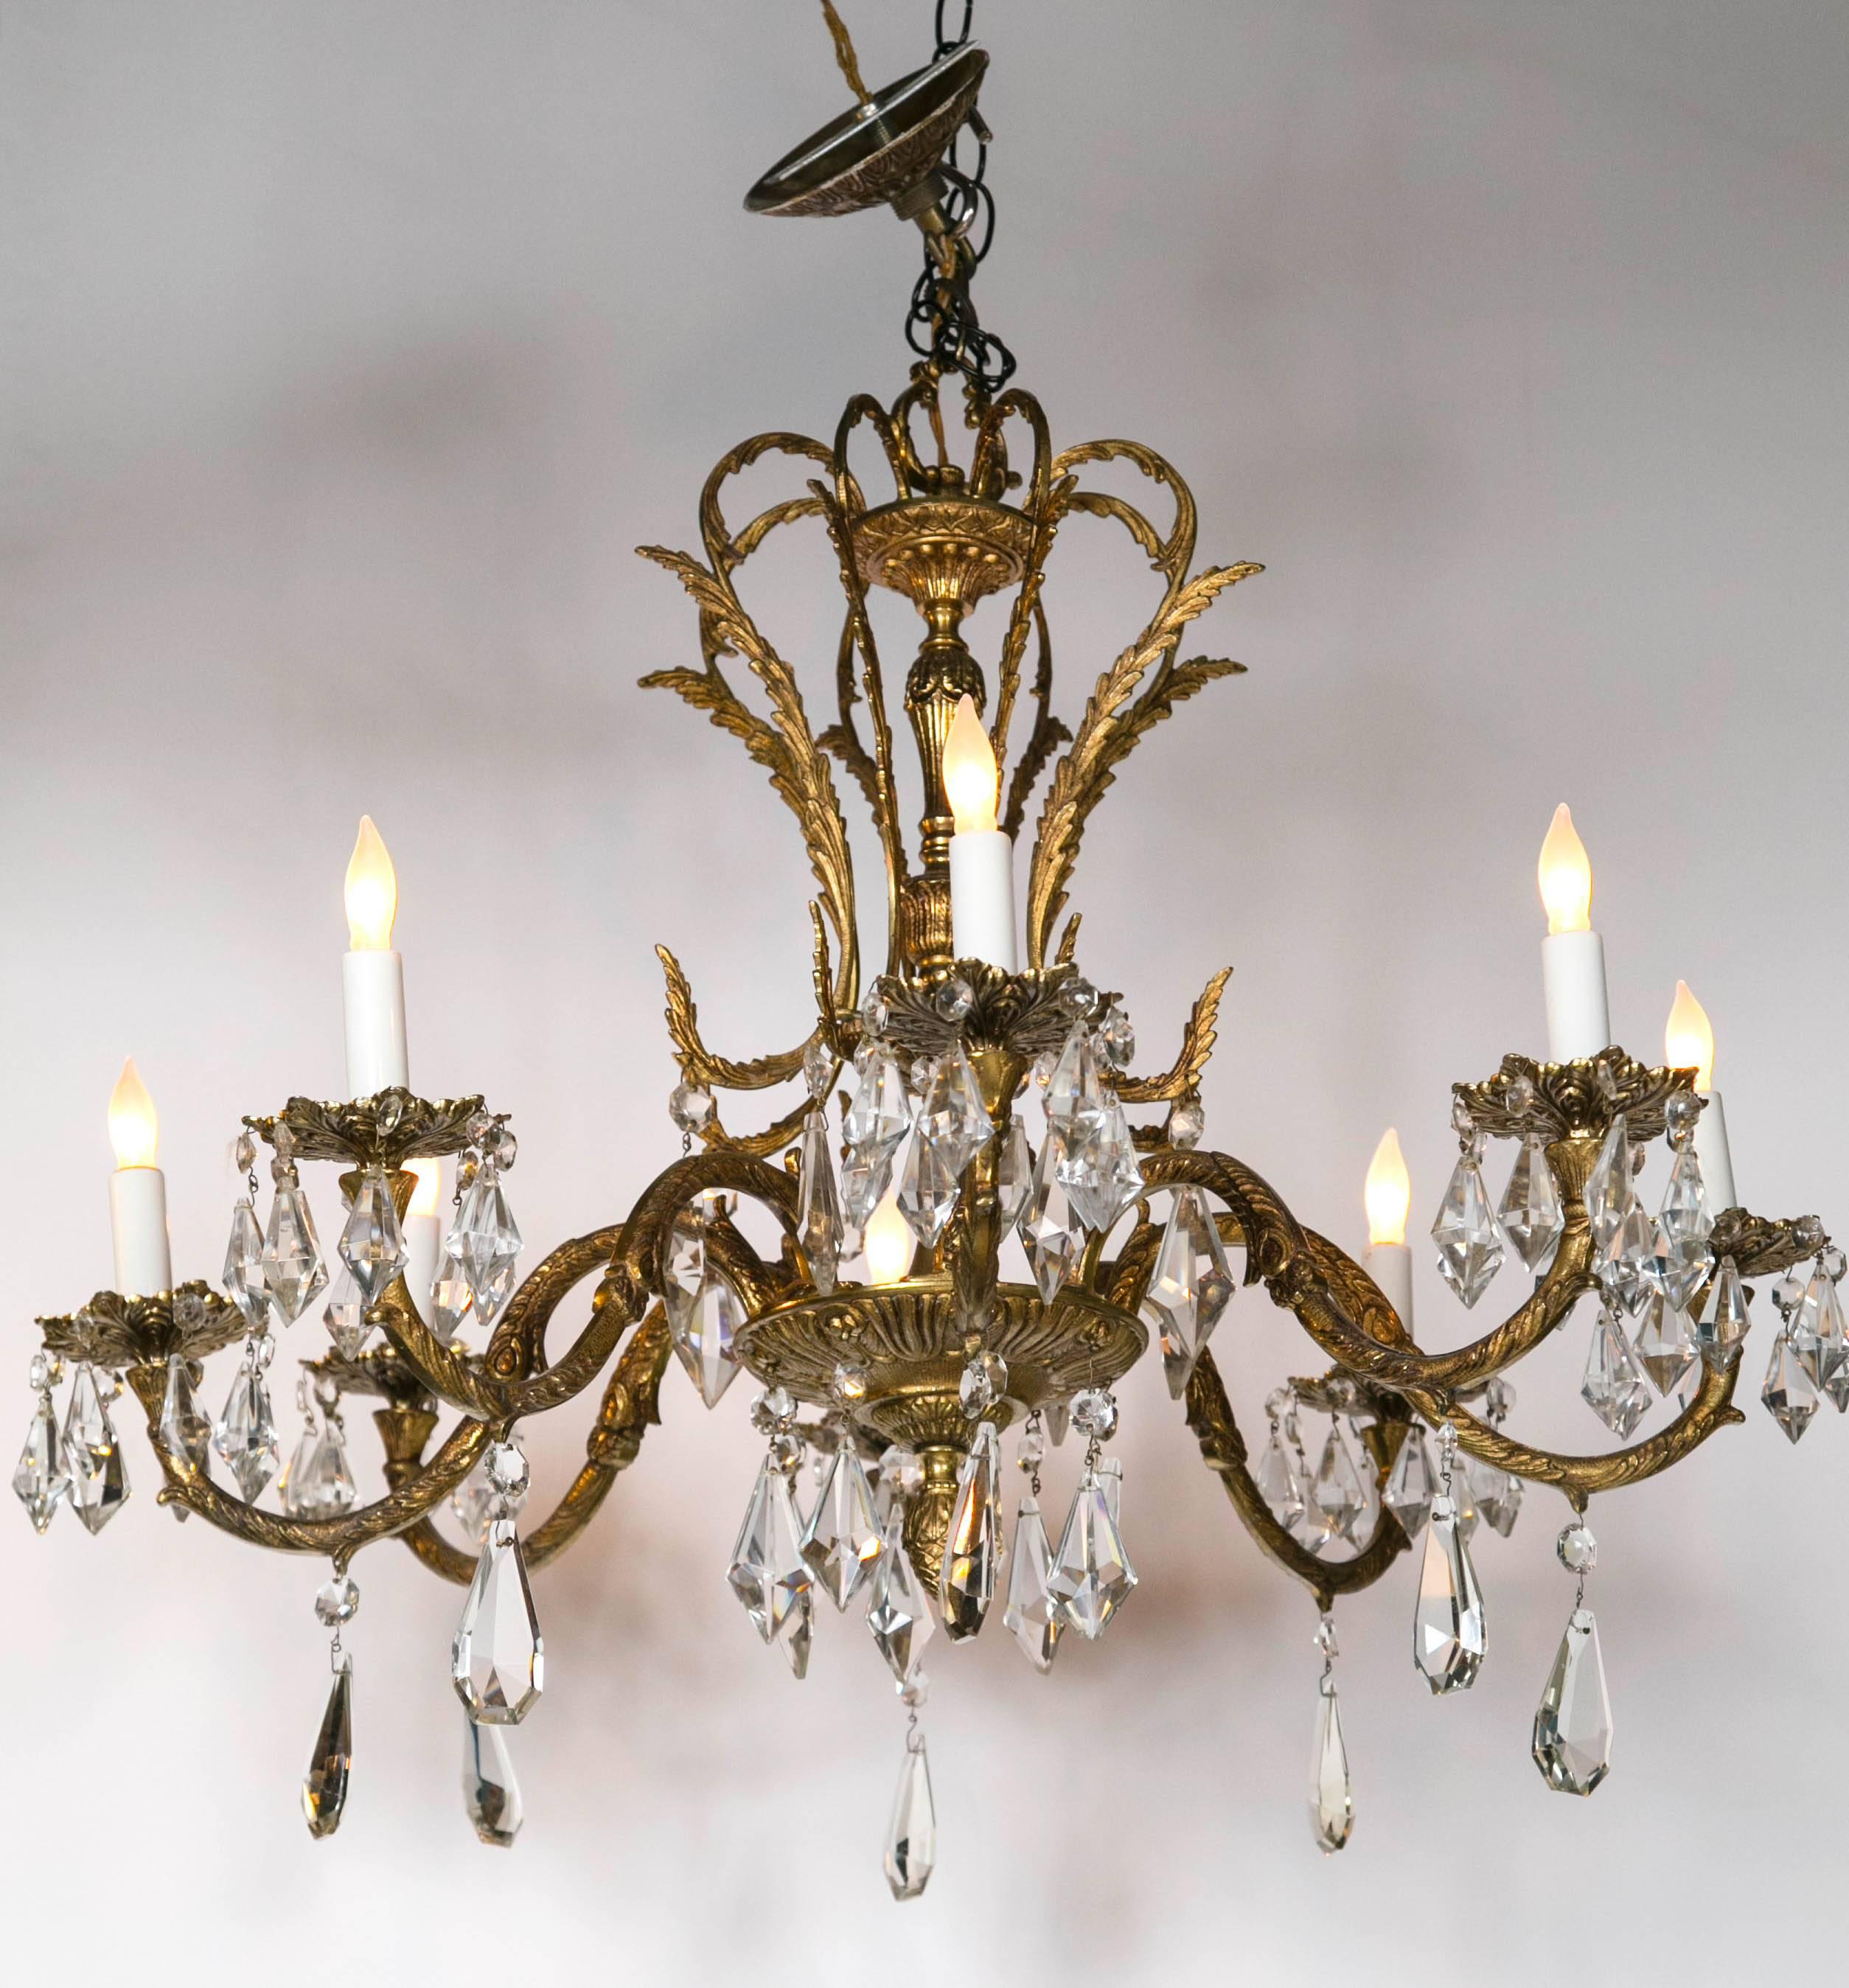 Pair of ornate brass and bronze chandeliers. Kite prisms. Vintage.